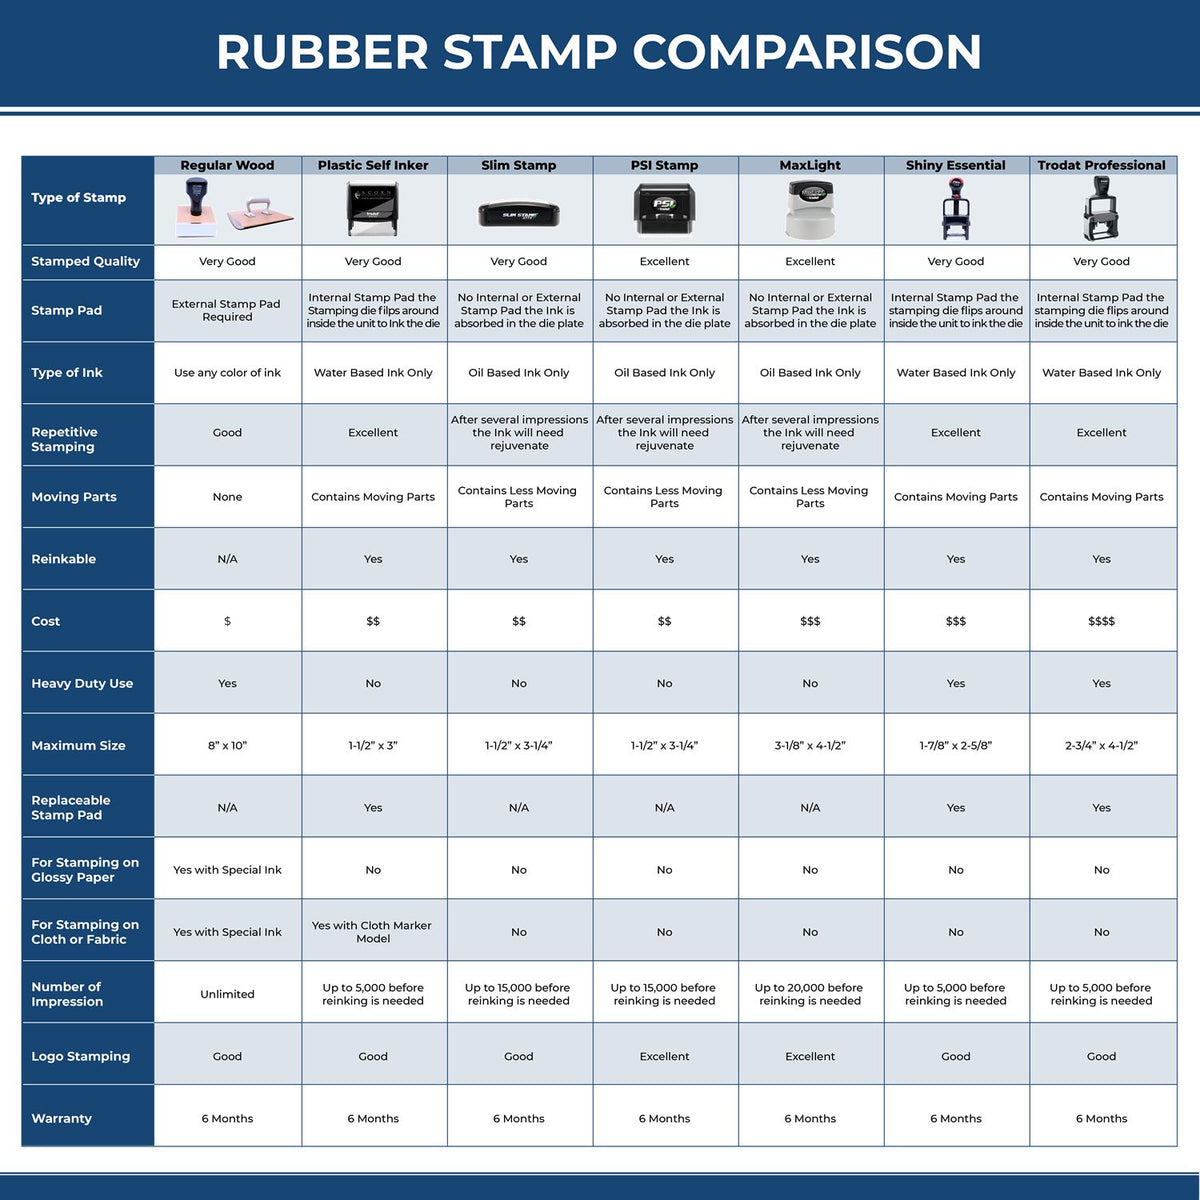 Large Self-Inking Curley Past Due Stamp 4939S Rubber Stamp Comparison